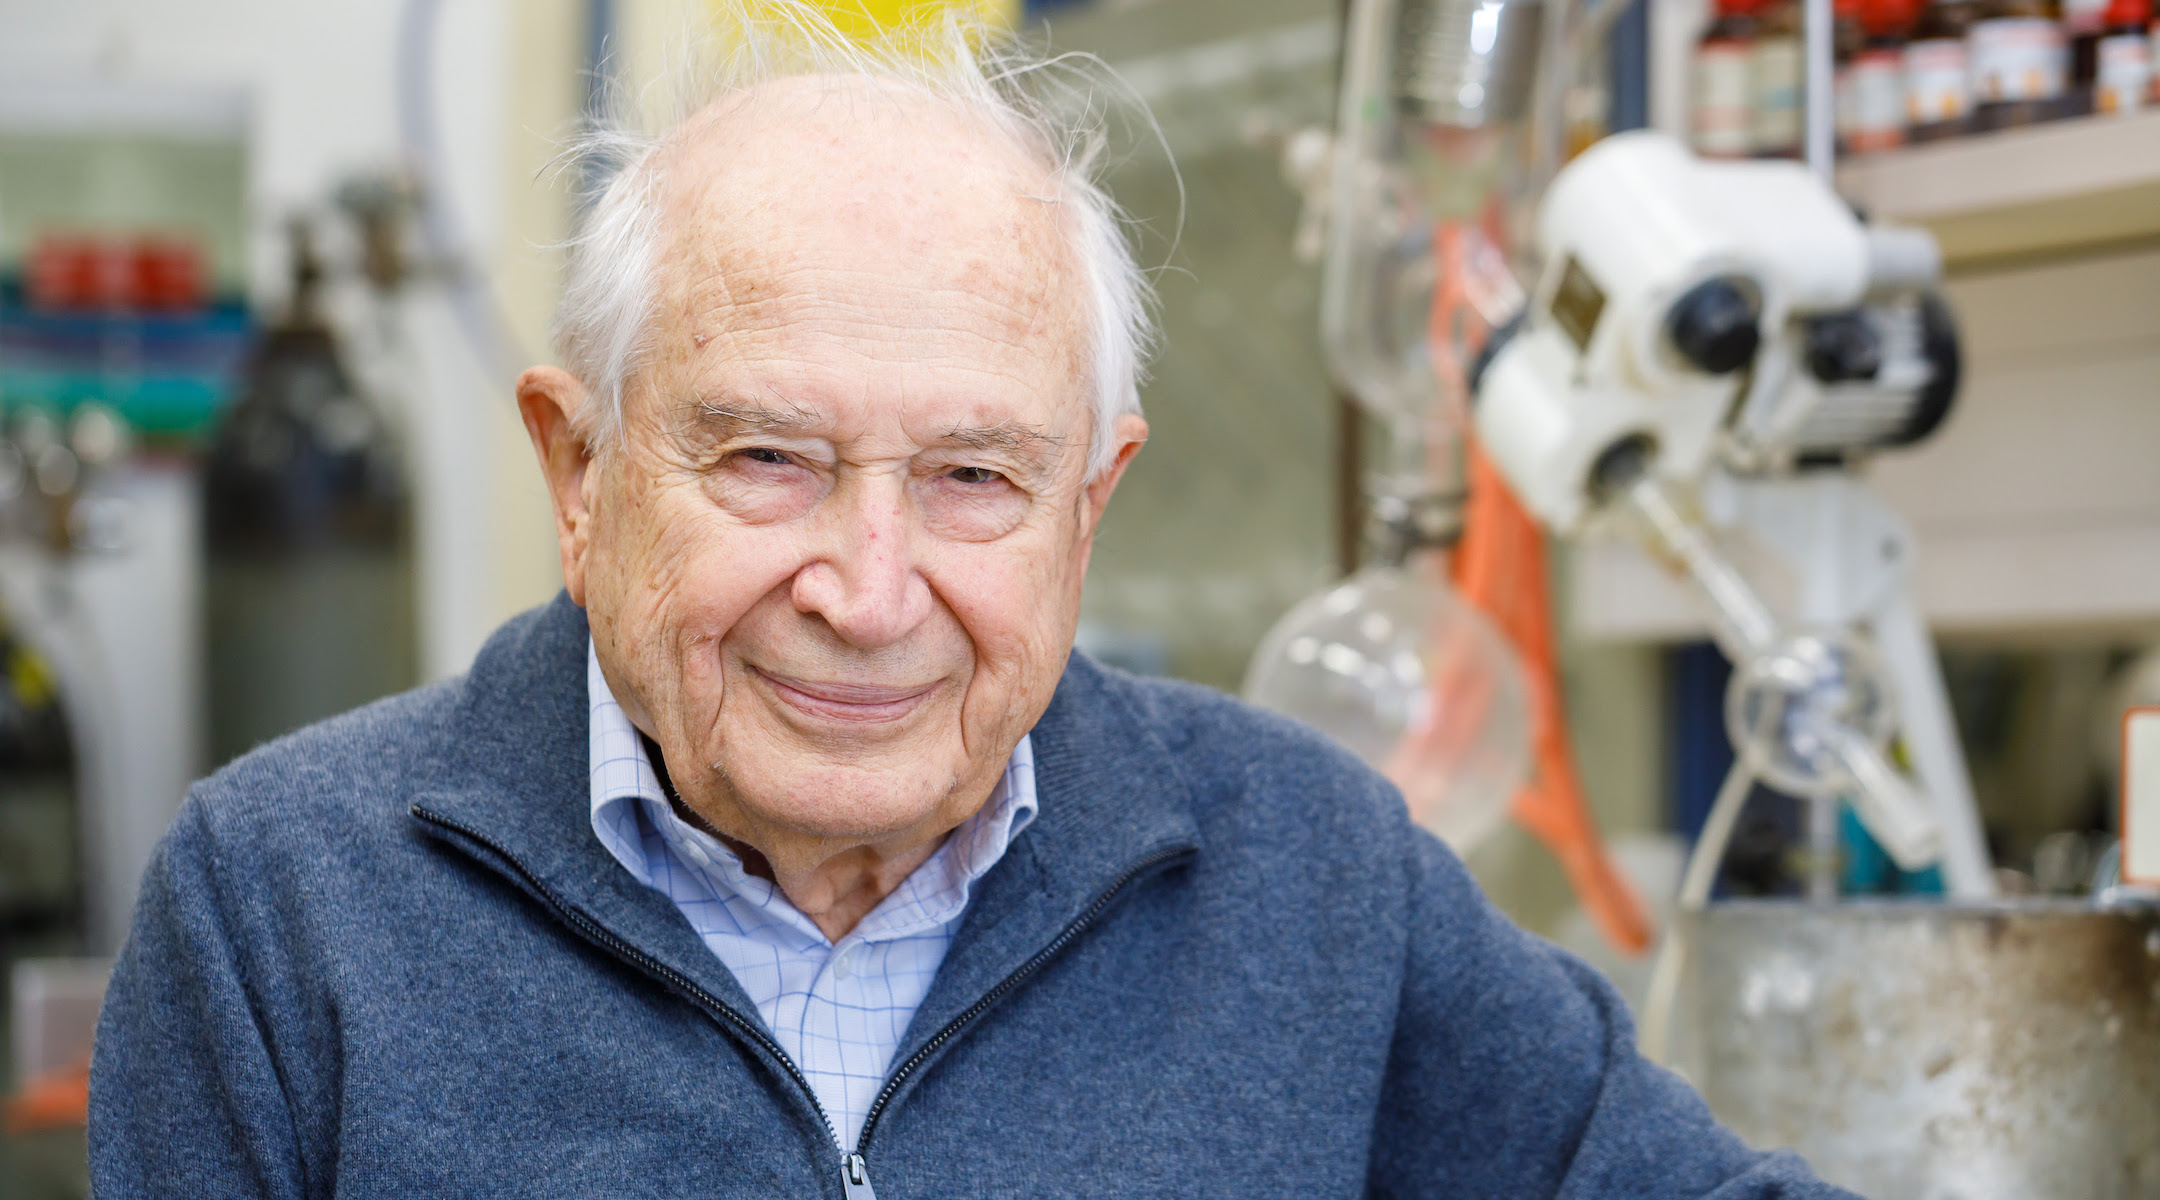 Raphael Mechoulam, Israel’s ‘father of cannabis research,’ dies at 92